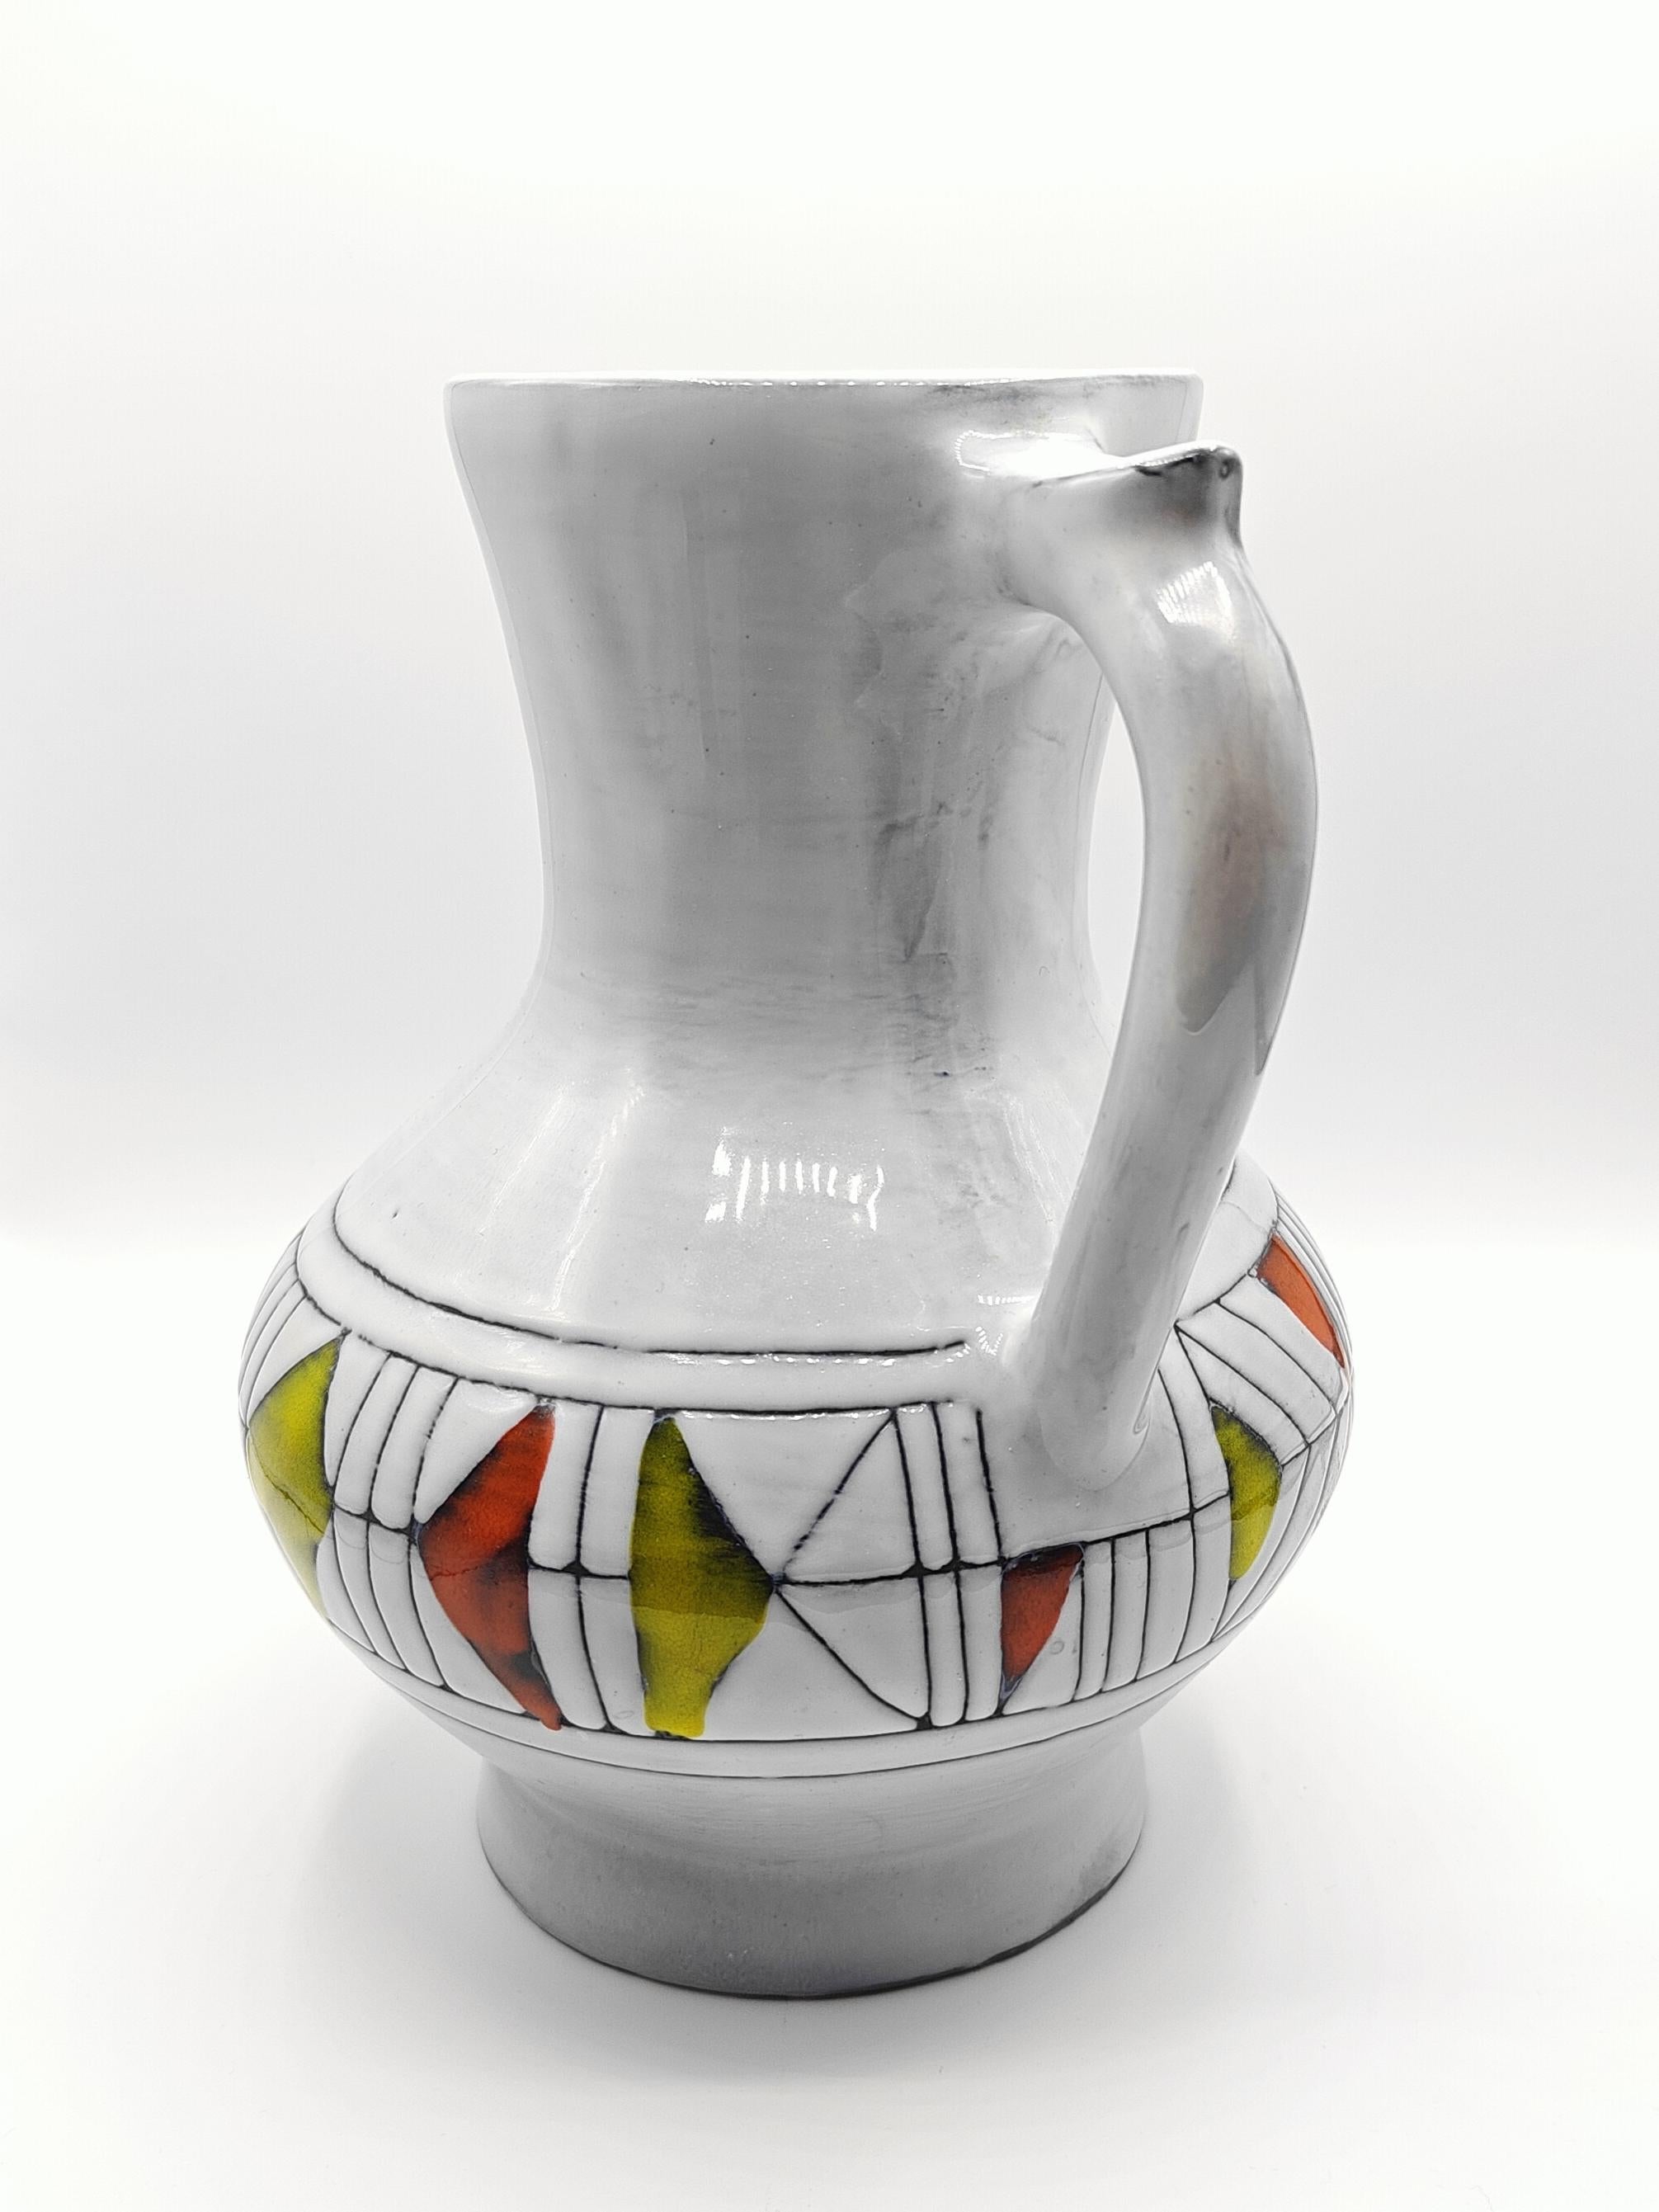 Pitcher by Roger Capron, ceramist in Vallauris, France, circa 1962. This pitcher is made of enamelled terracotta, signed and numbered under the base. 

This geometric abstract decoration, with yellow and red on white enamel, gives a design touch